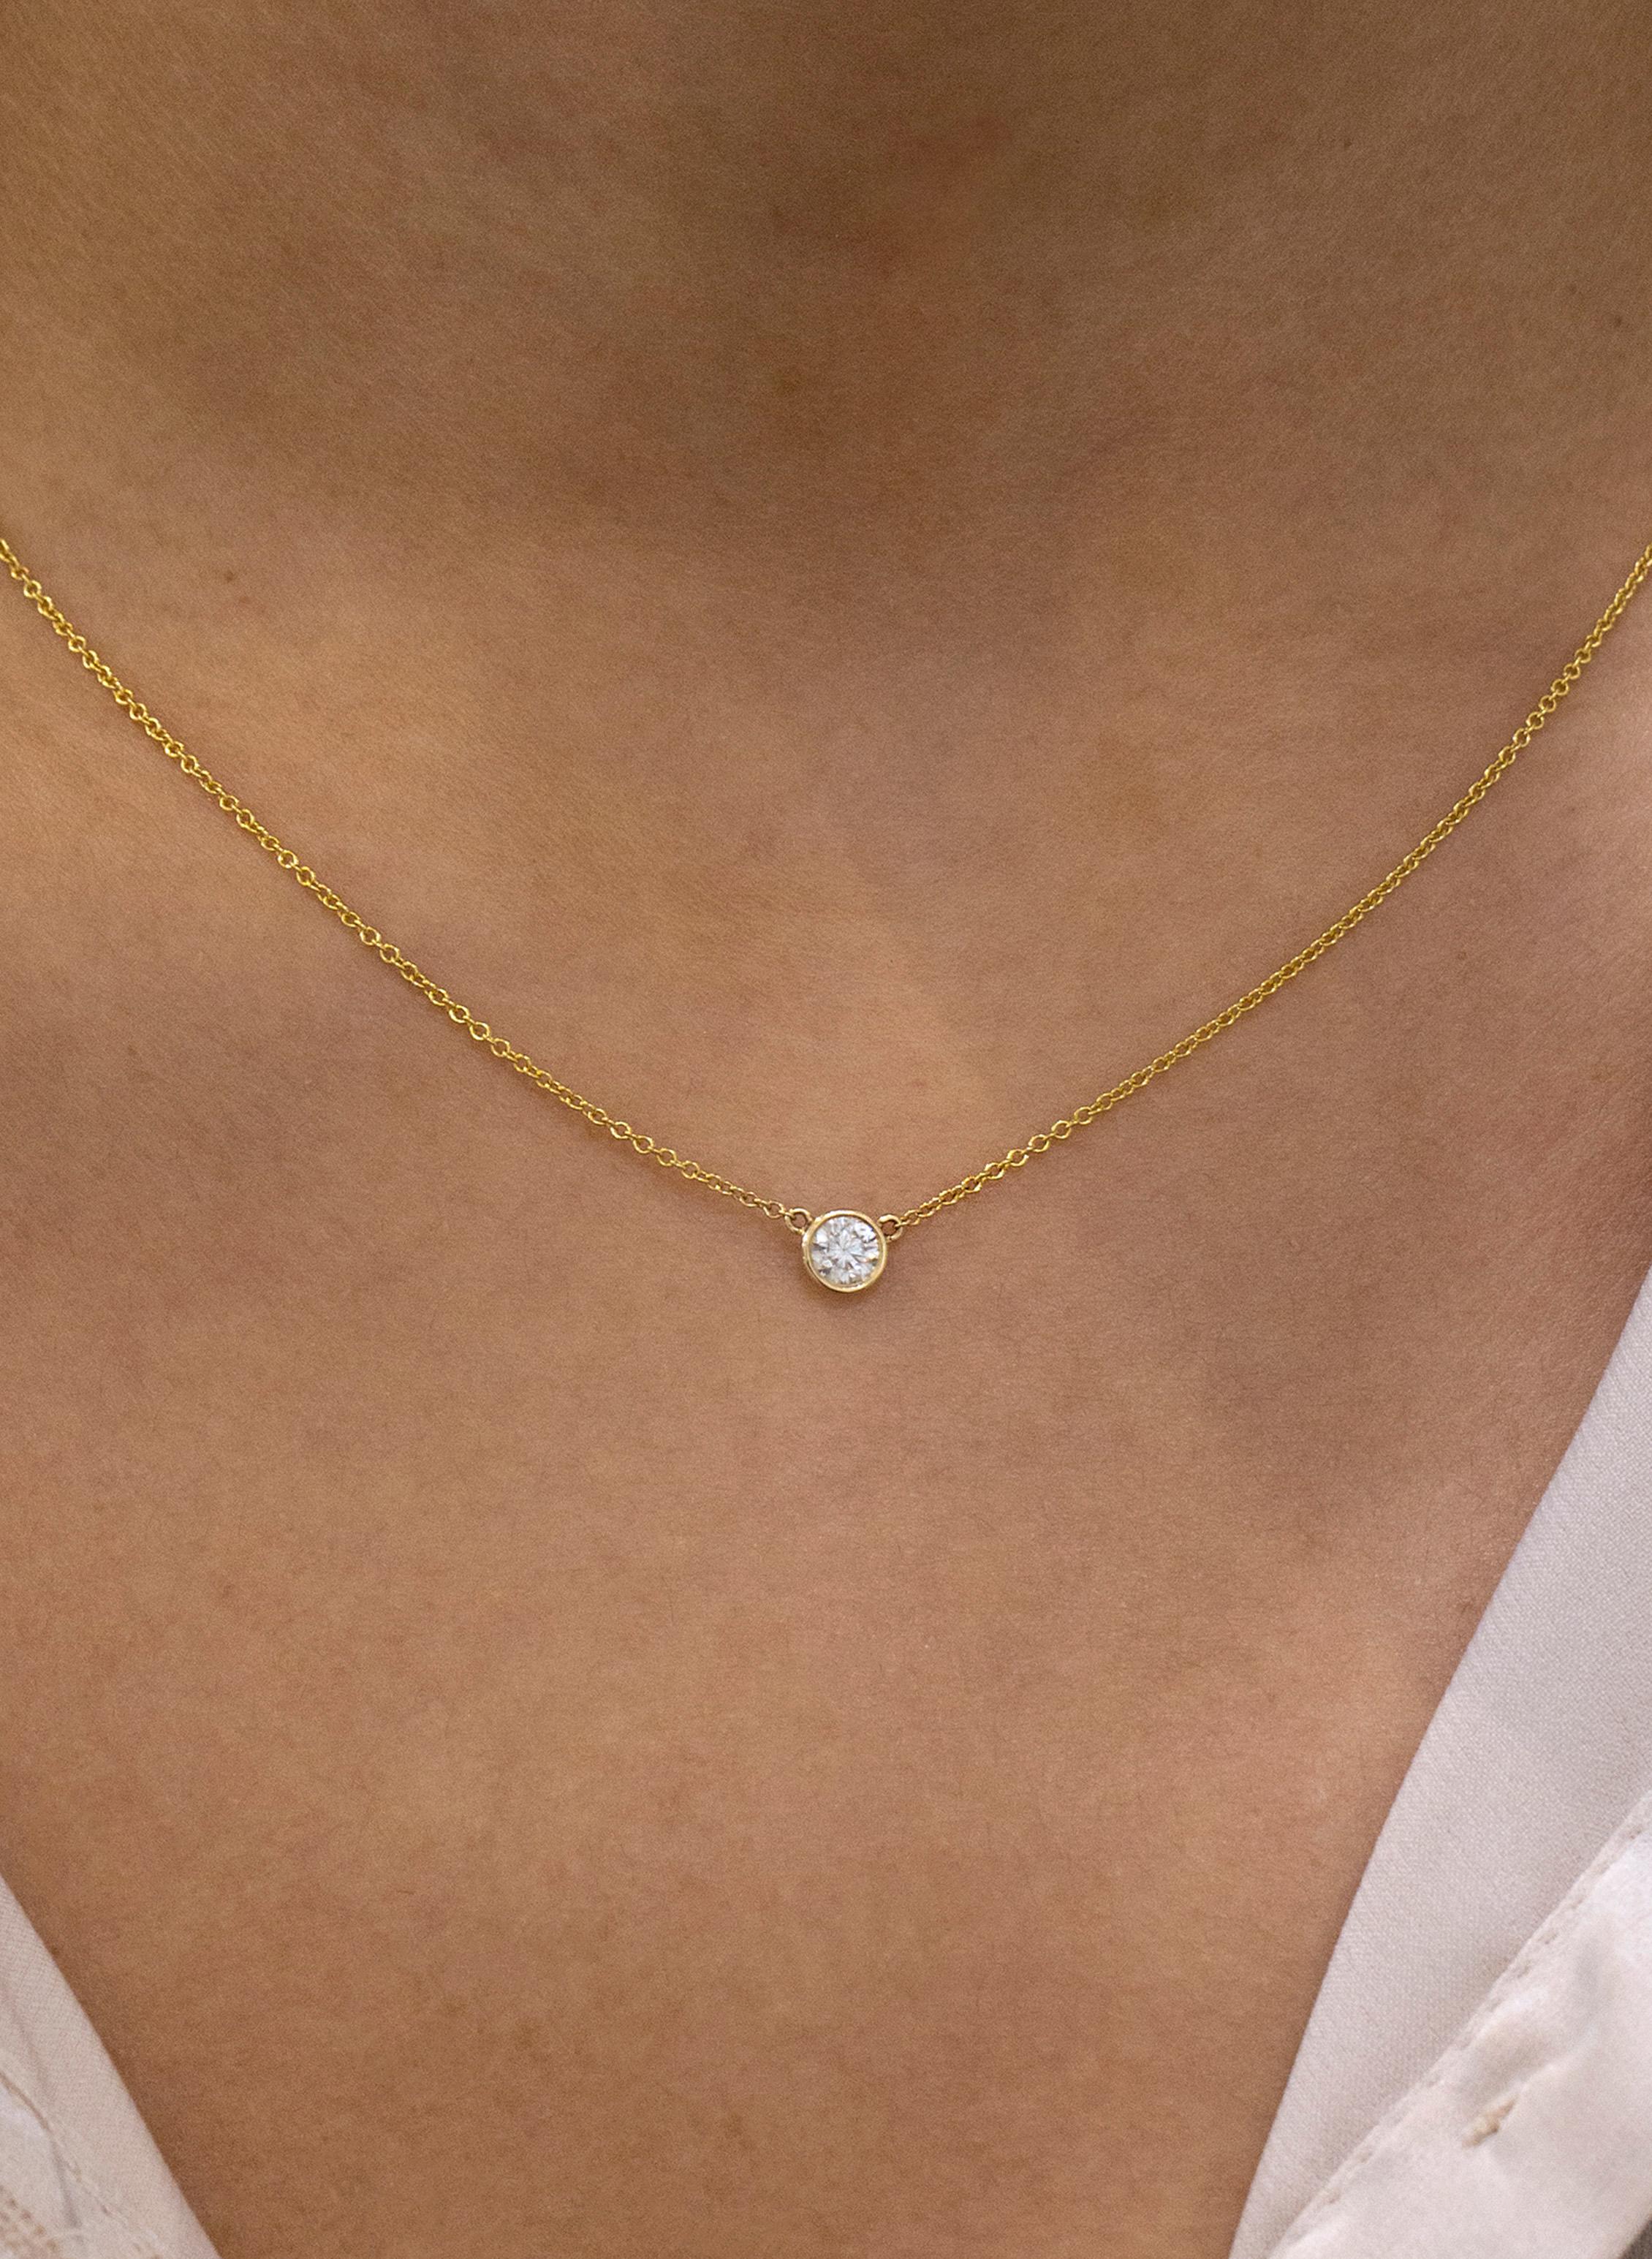 A simple and versatile solitaire pendant necklace showcasing a single 0.26 carat round diamond, 
F color SI2 clarity. In a 14 karat Yellow Gold bezel. Attached to a 16 inch with an interval at 15 inch in 14k Yellow Gold chain. 

Roman Malakov is a